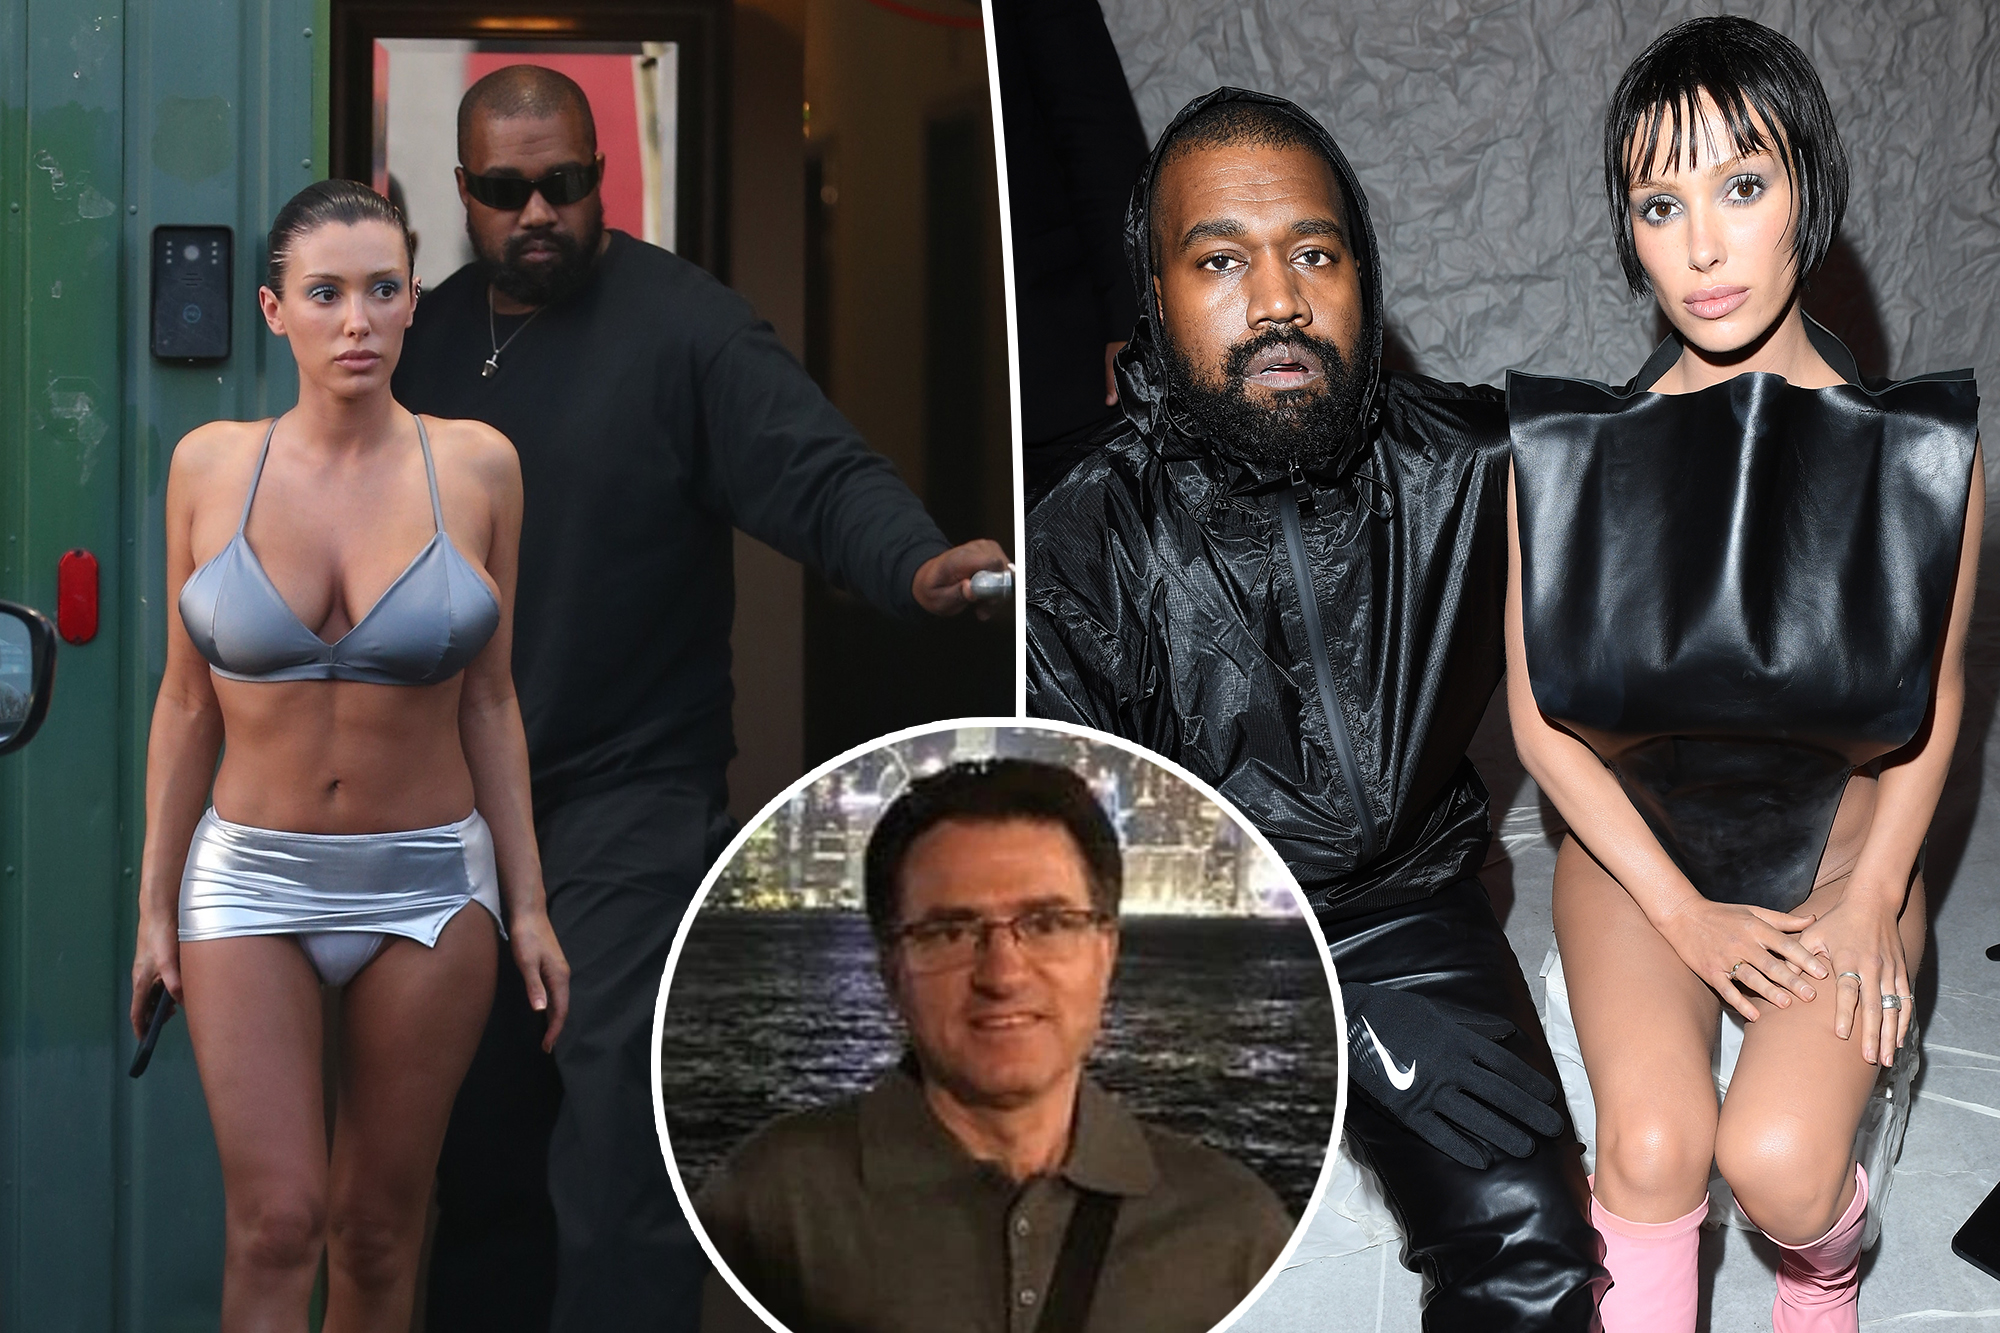 Bianca Censori's dad demands her to fly to Australia with Kanye West to address concerns over X-rated outfits